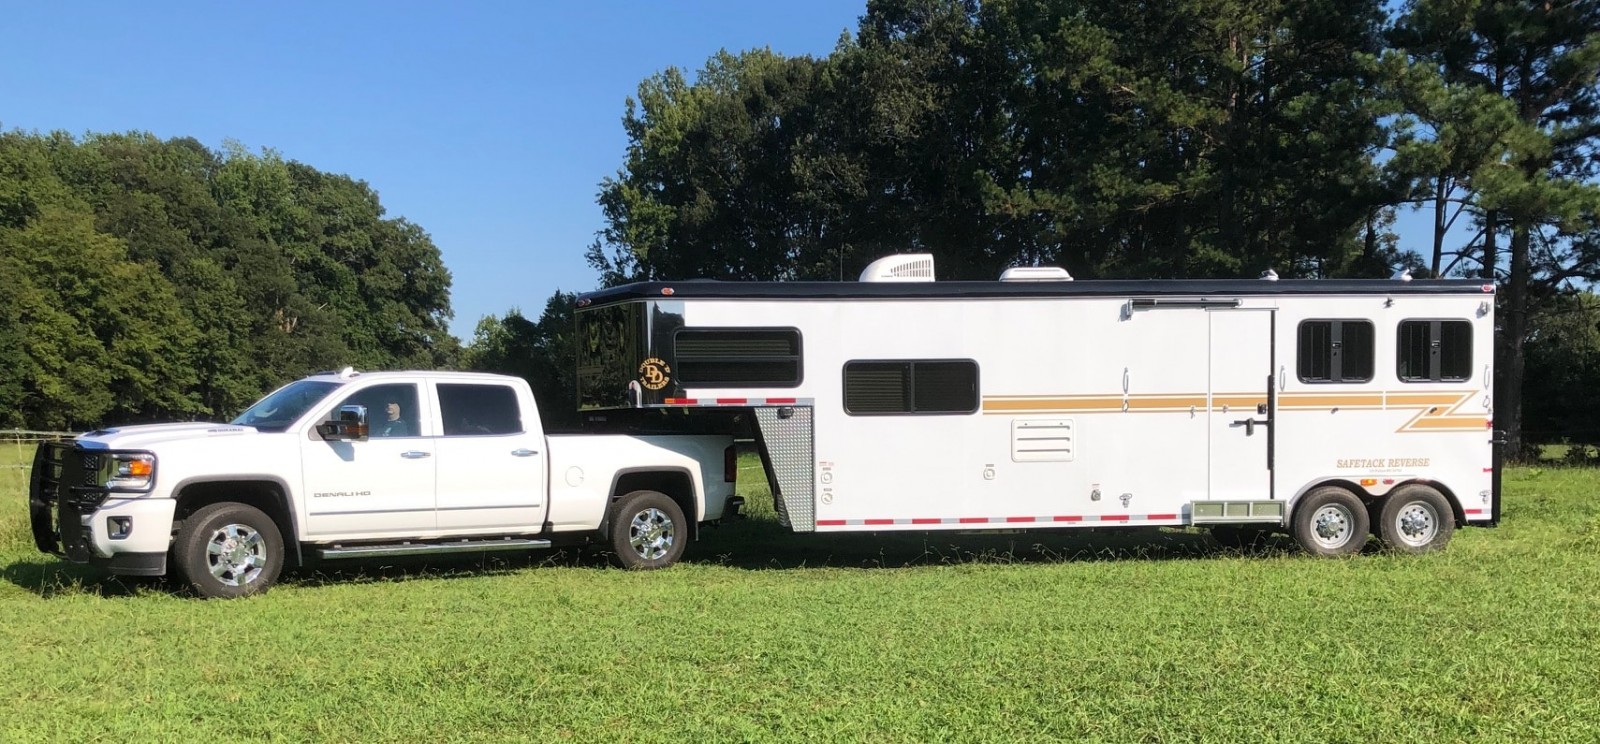 A Double D Trailers horse trailer with living quarters hitched to a tow vehicle. 